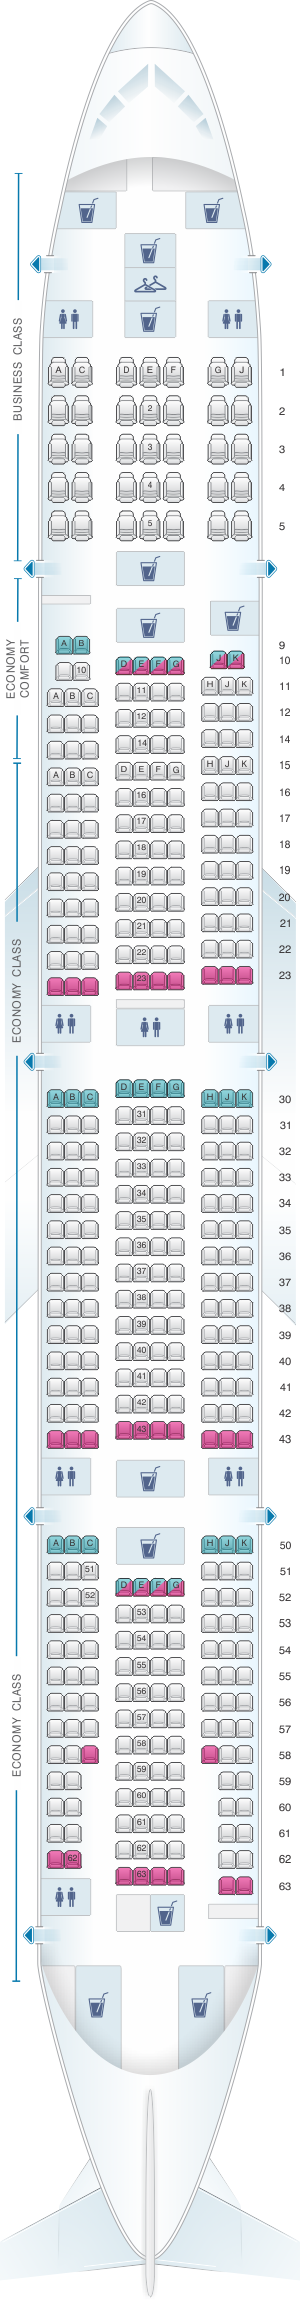 seat map for boeing 777 300er